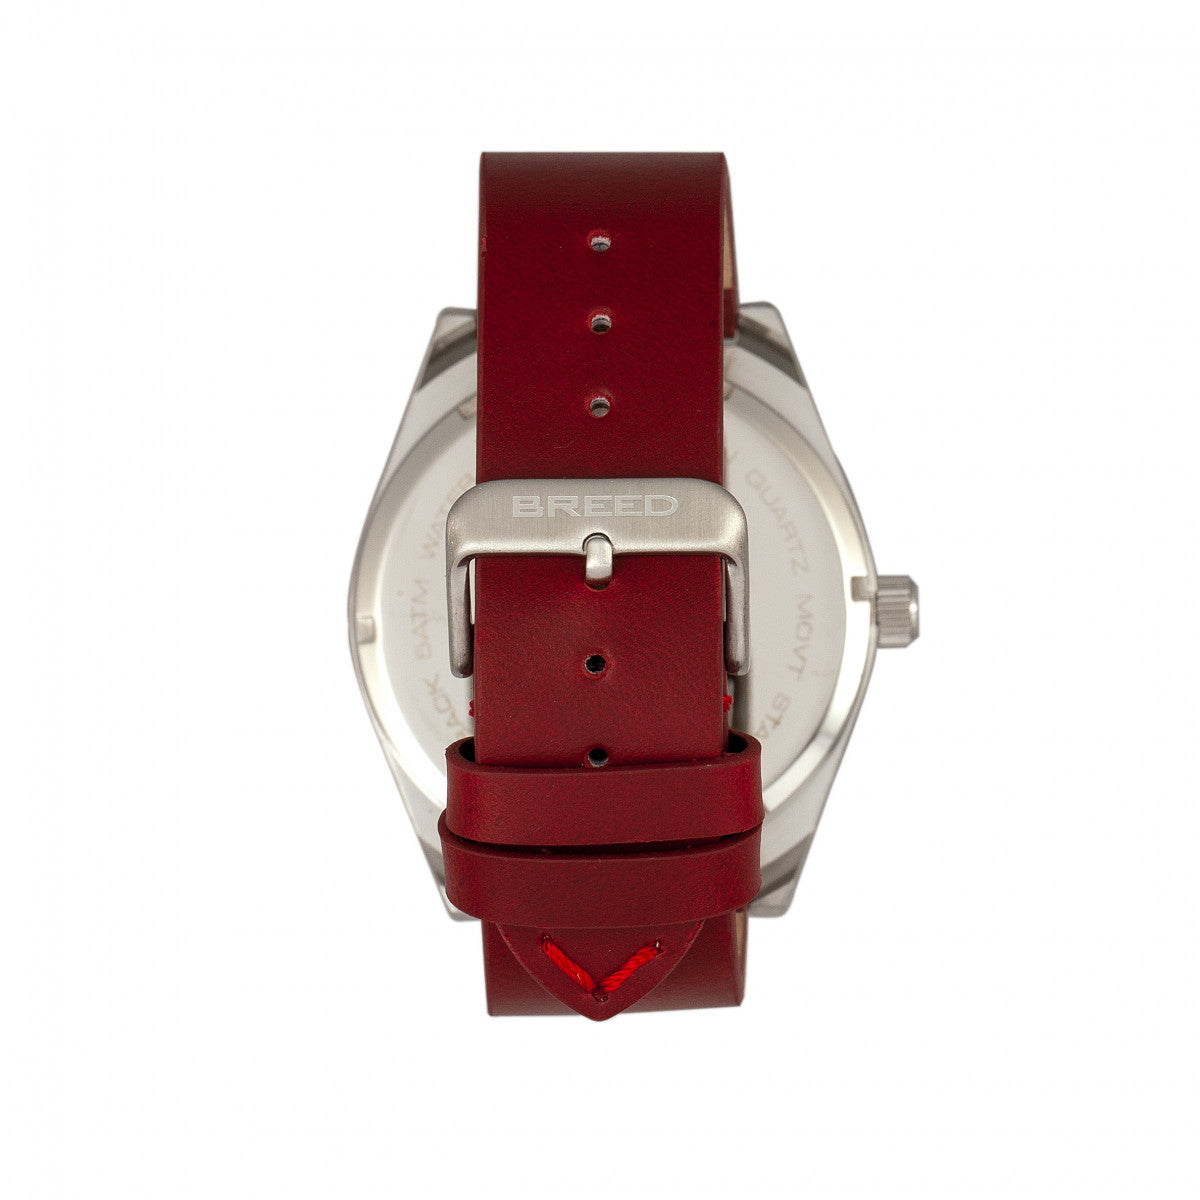 Breed Ranger Leather-Band Watch w/Date - Silver/Red - BRD8004